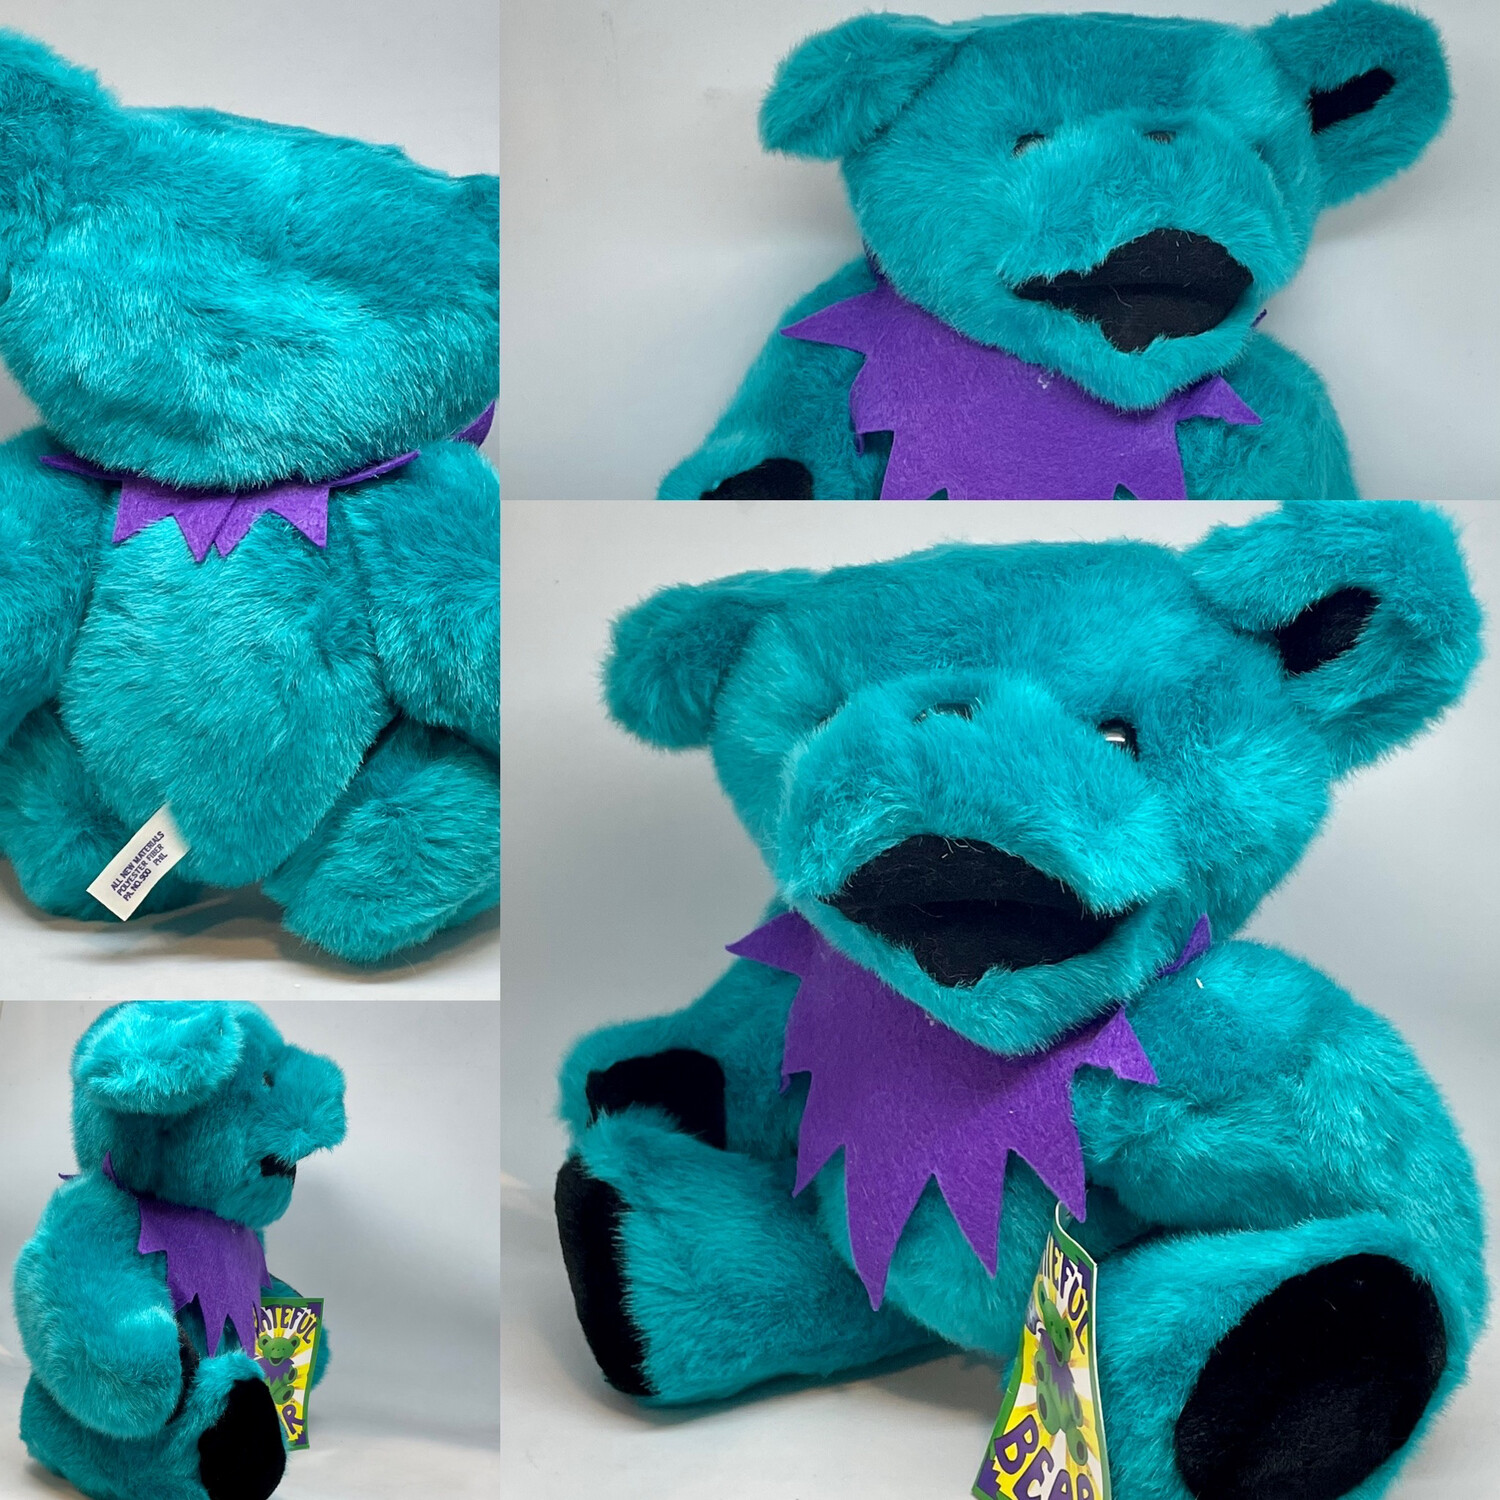 Vintage 1990 Grateful Dead Teddy Bear Blue/Teal With Articulating Limbs. New with Intact Tags